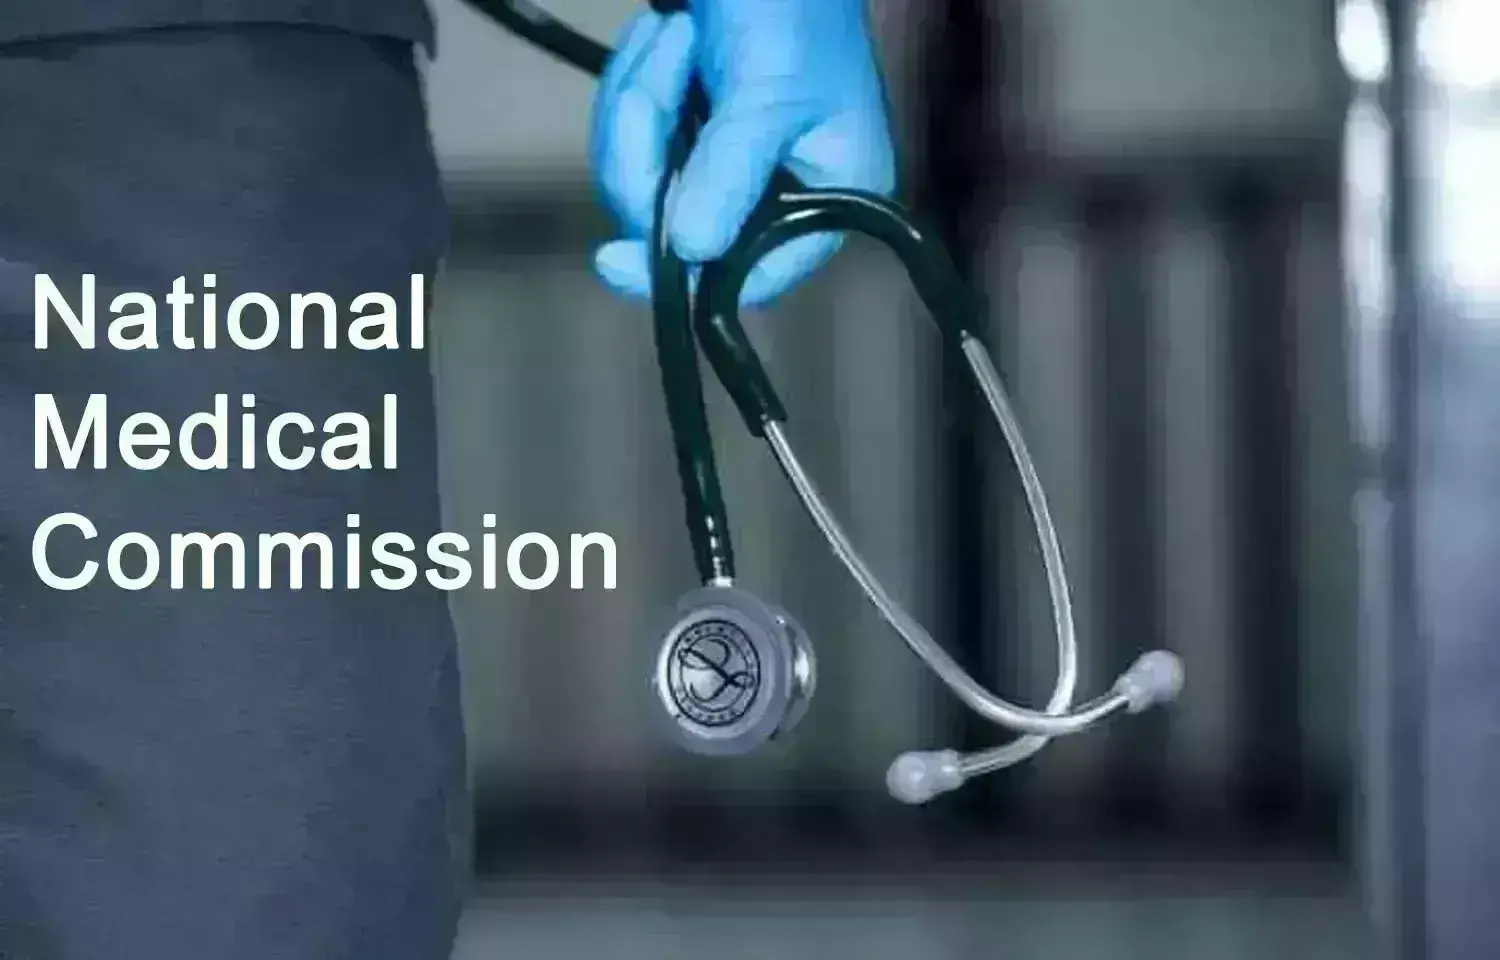 New MD, MS, DM, MCh Courses Or Increase In Intake: NMC Re-Invites Applications